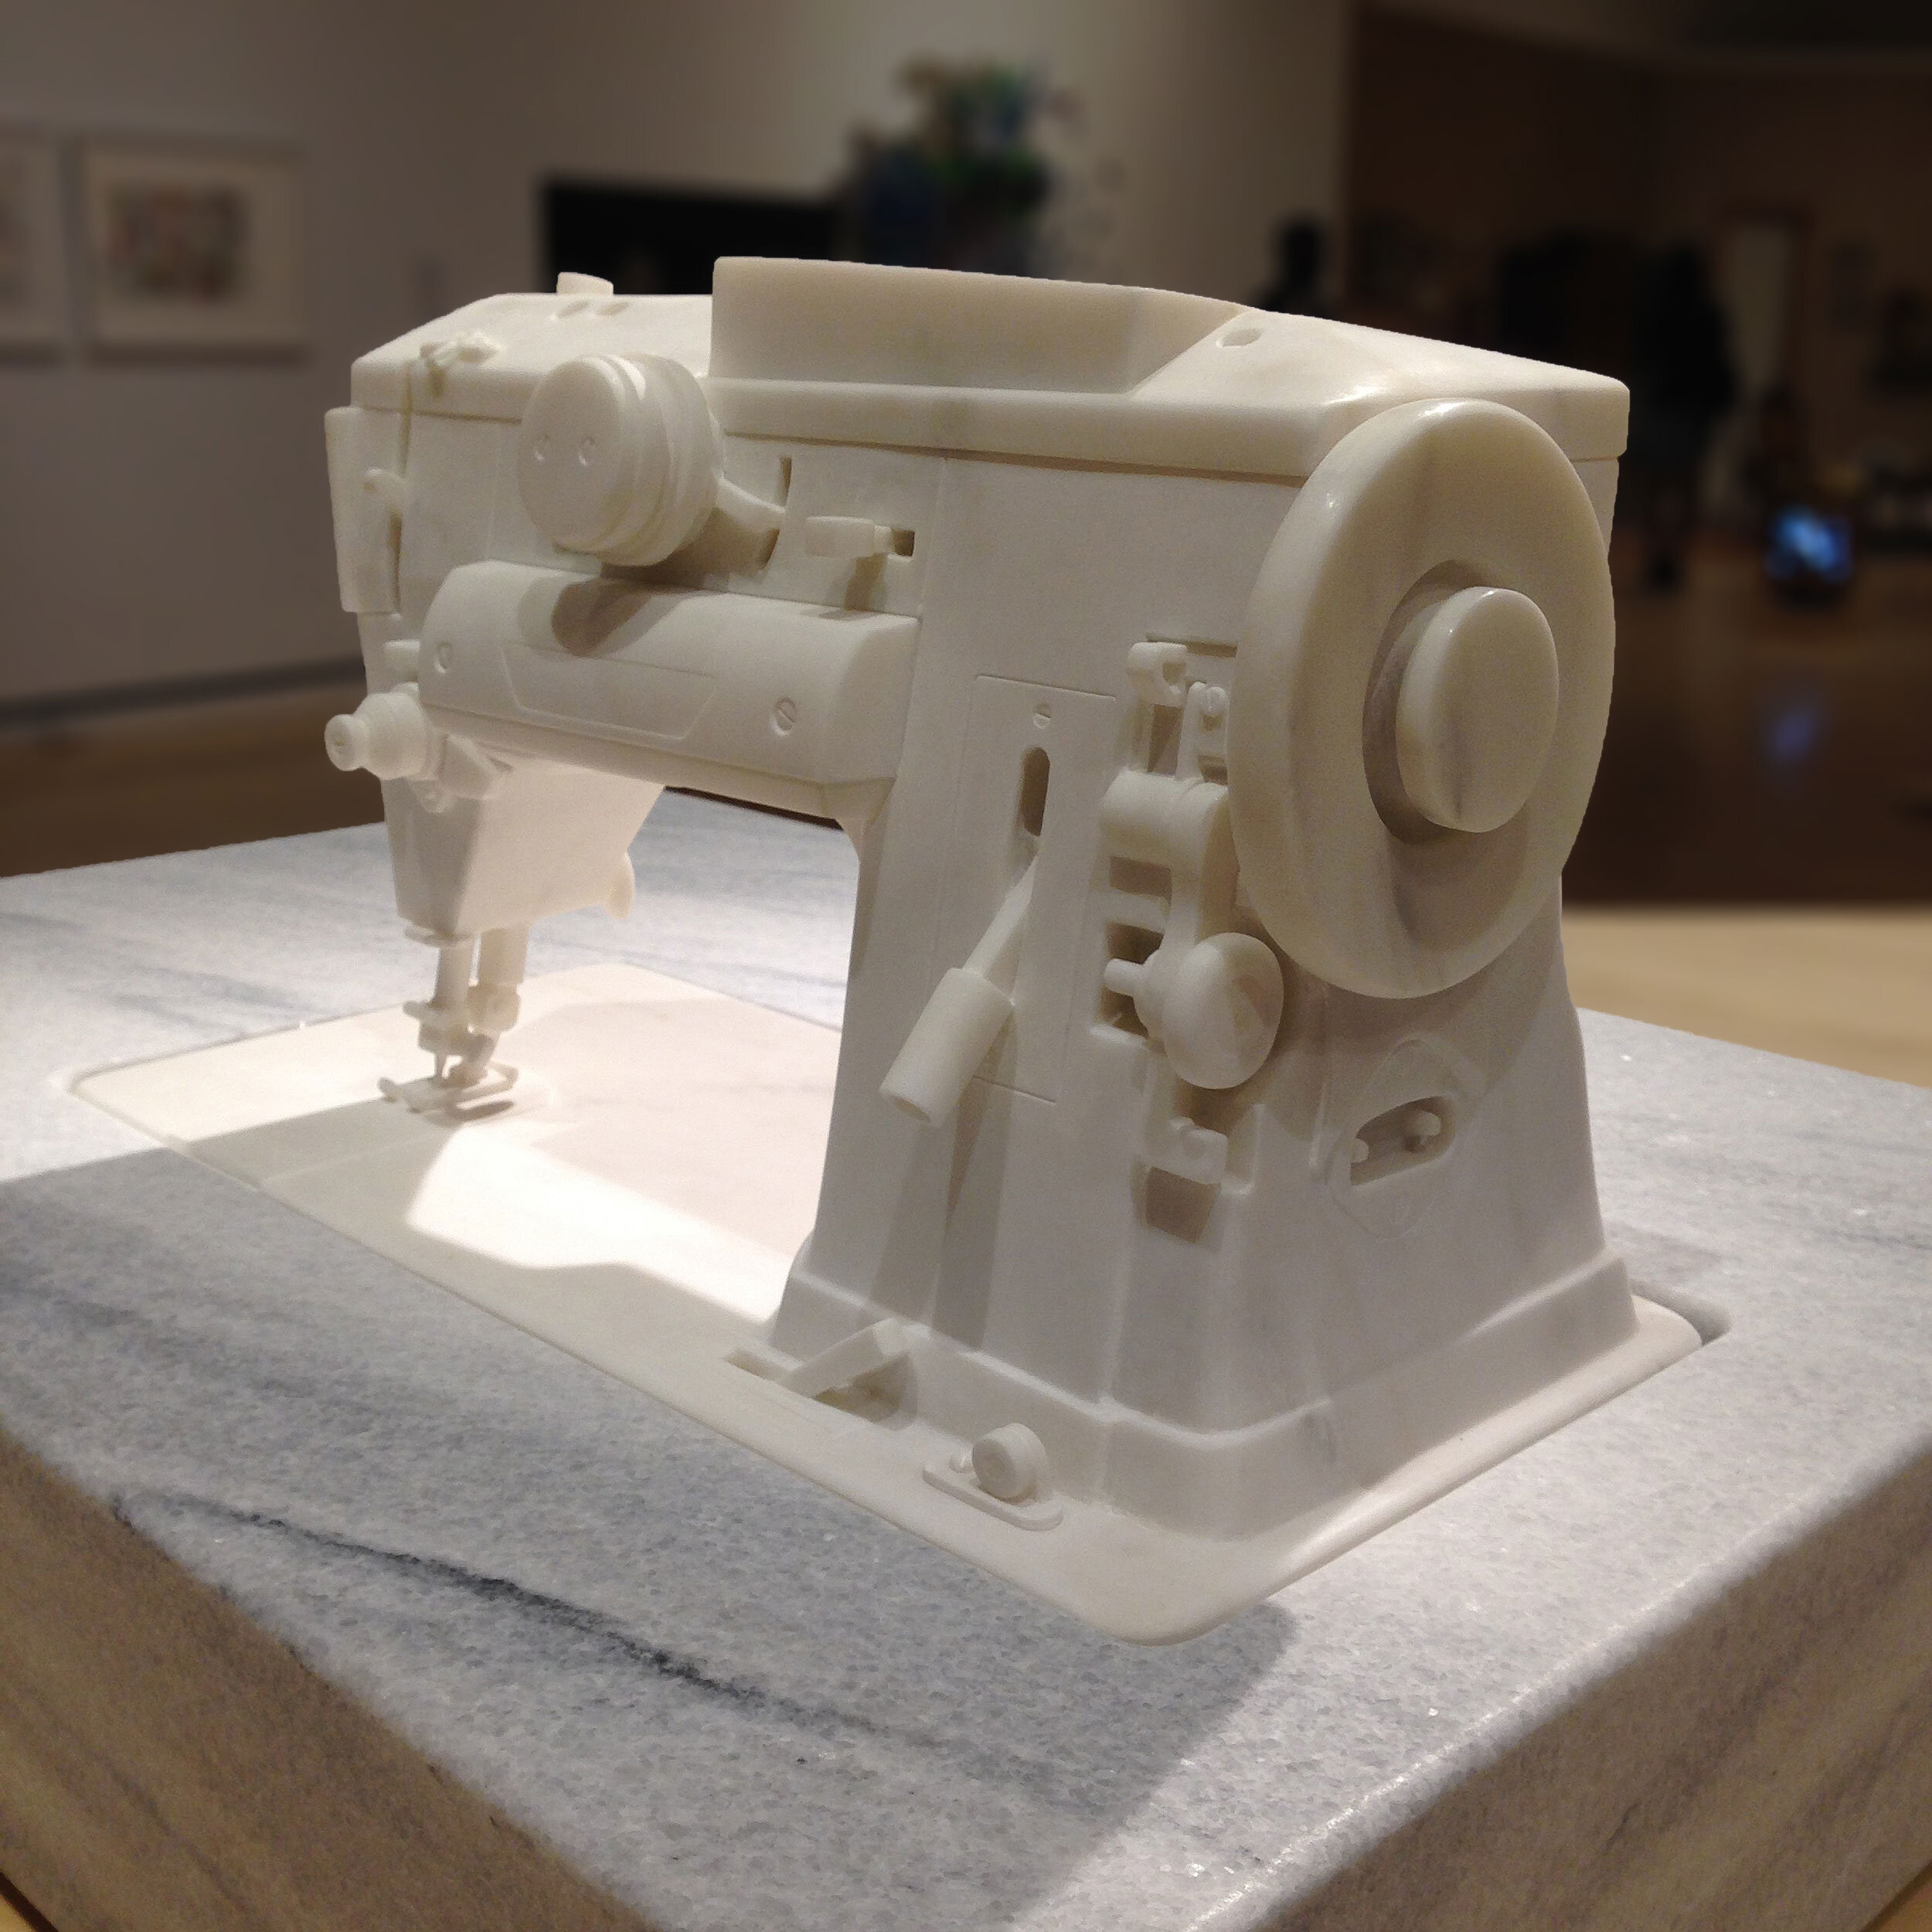 Hand-carved marble sewing machine sculpture by Peter Glenn Oakley.